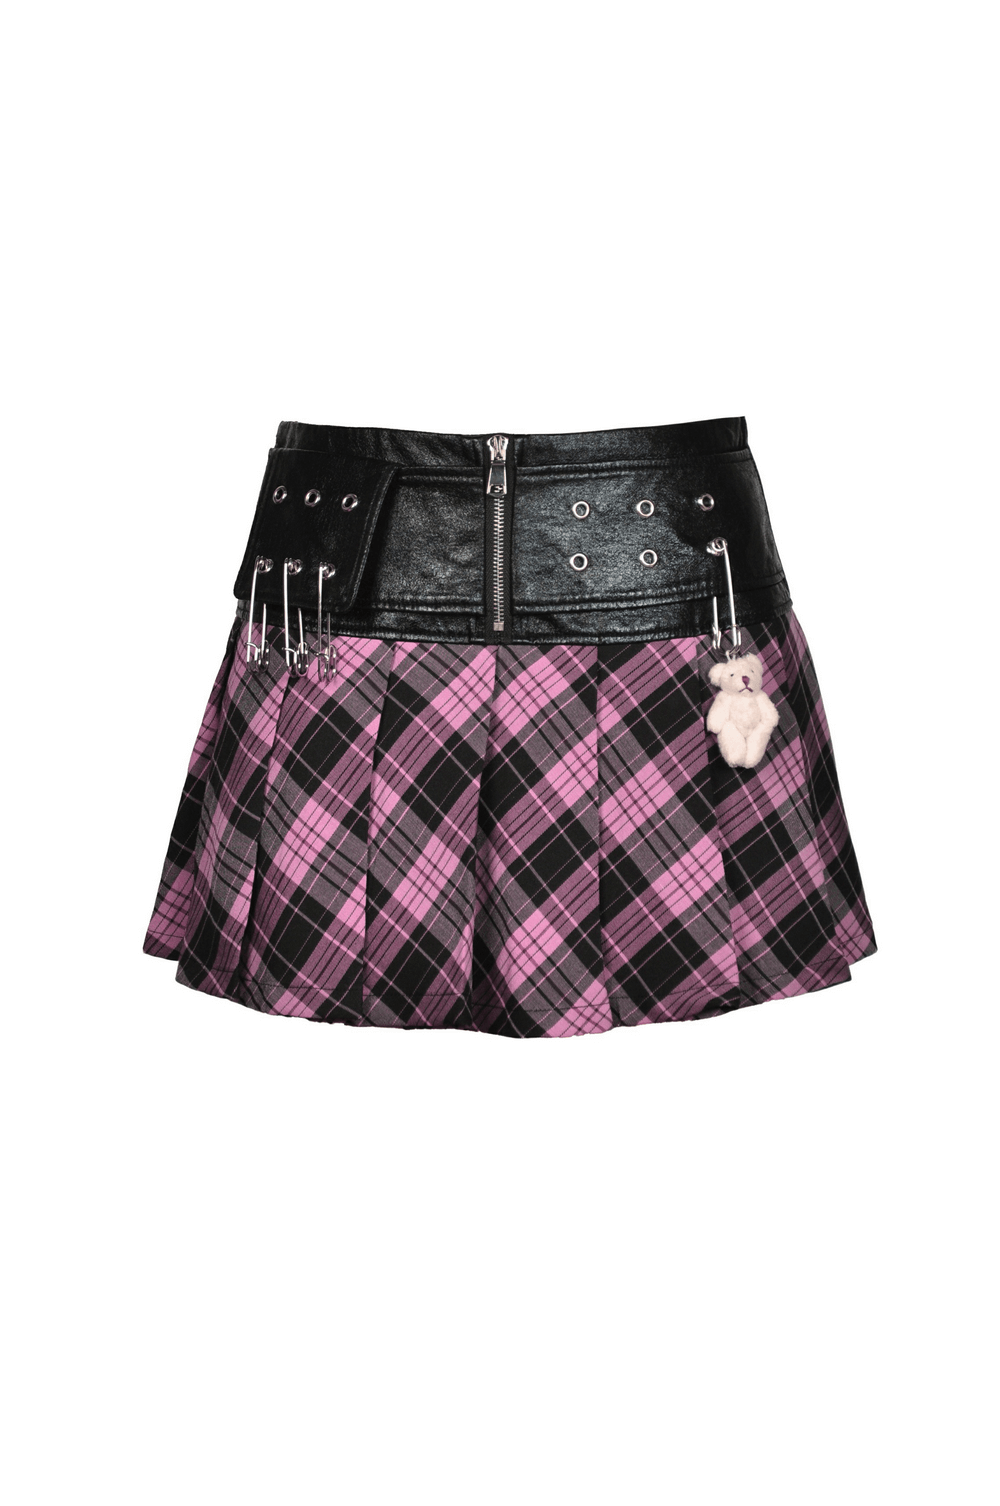 Pink and Black Plaid Mini Skirt with Edgy Leather Belt